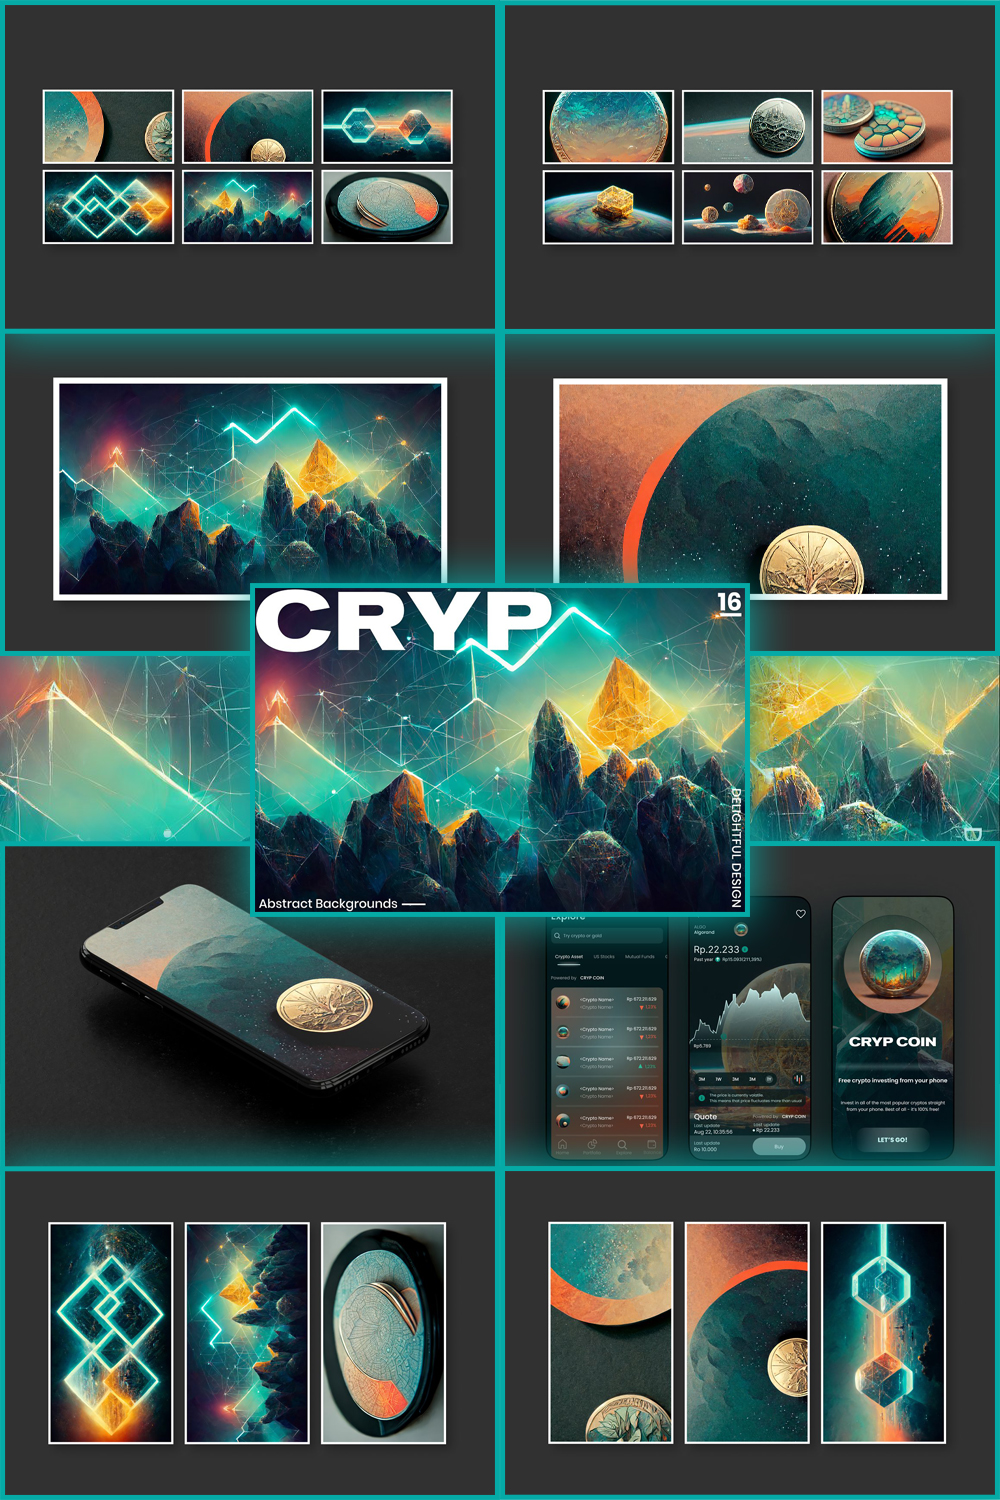 Cryp crypto backgrounds of pinterest.